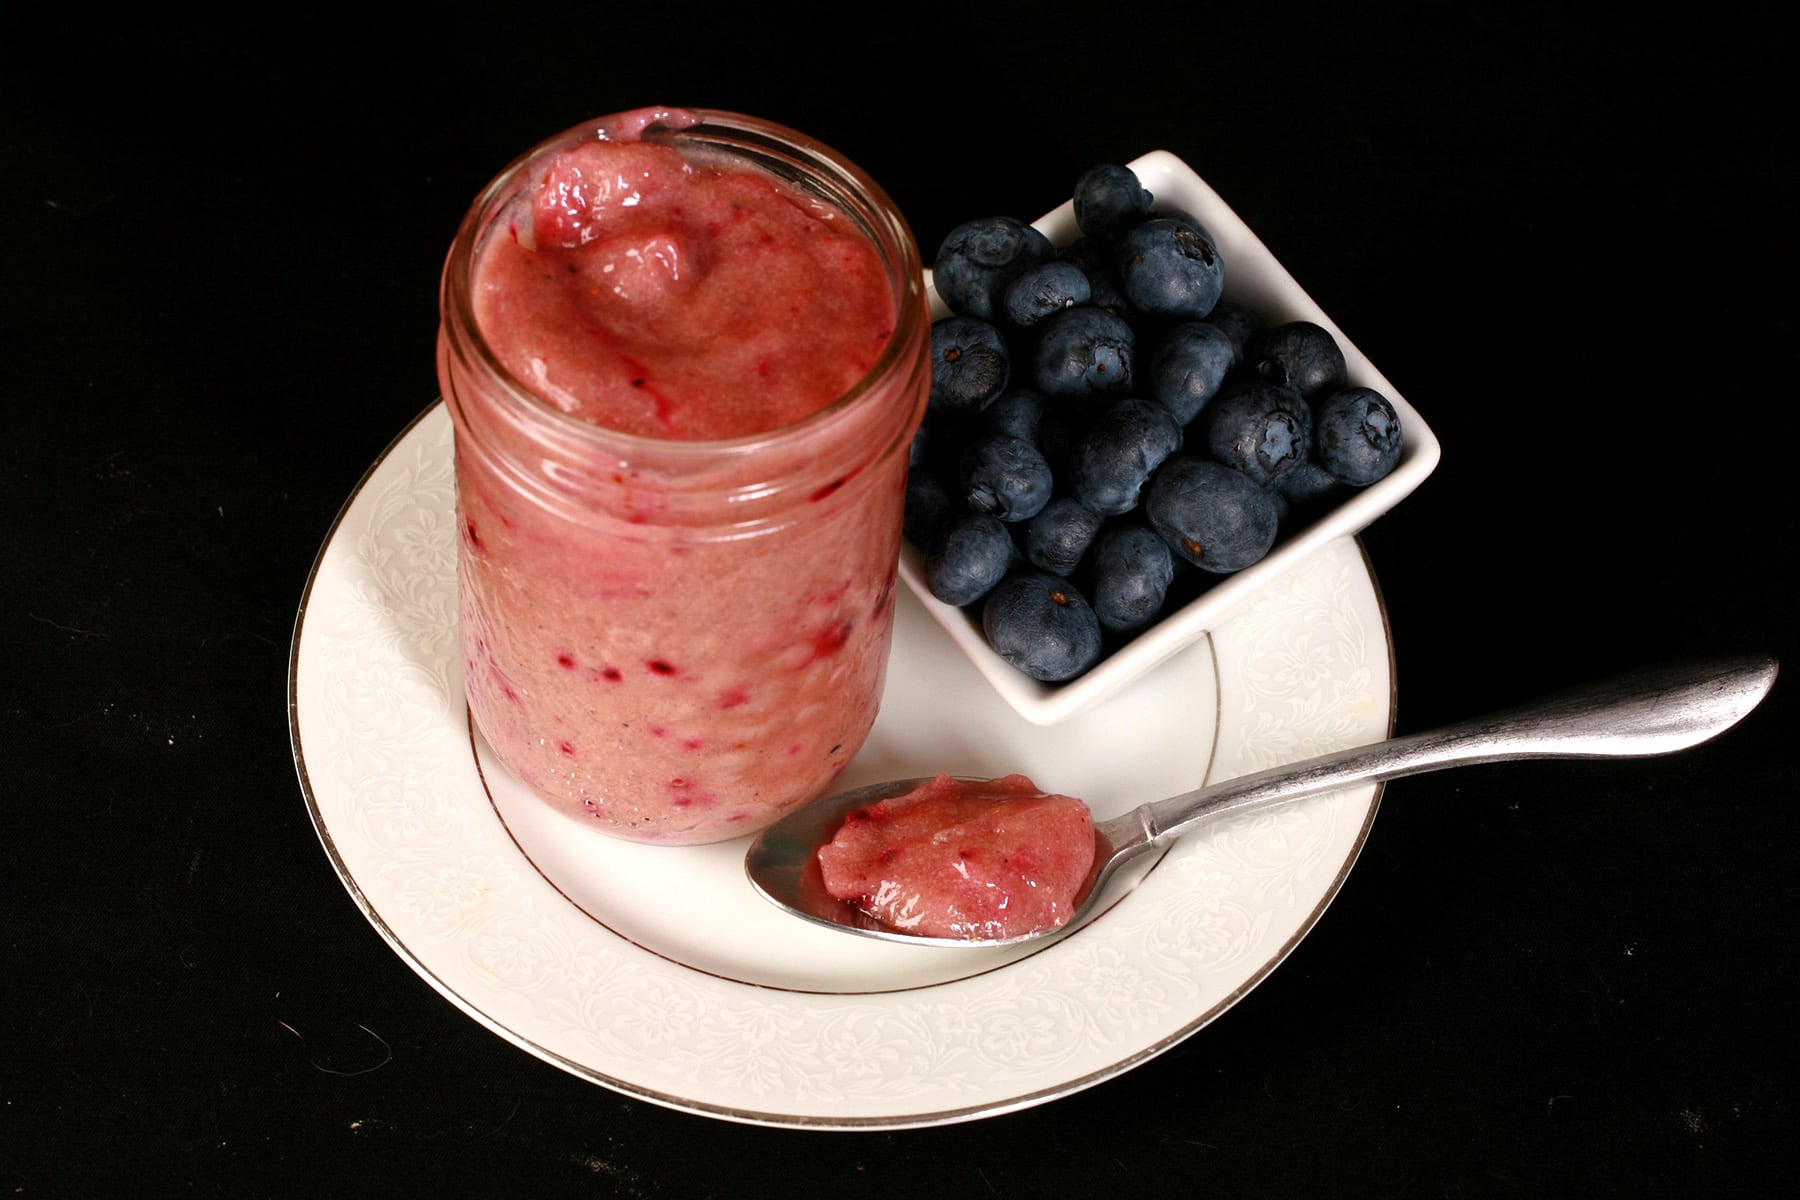 A jar of blueberry curd and a spoon of curd on a plate, along with a small bowl of fresh blueberries.